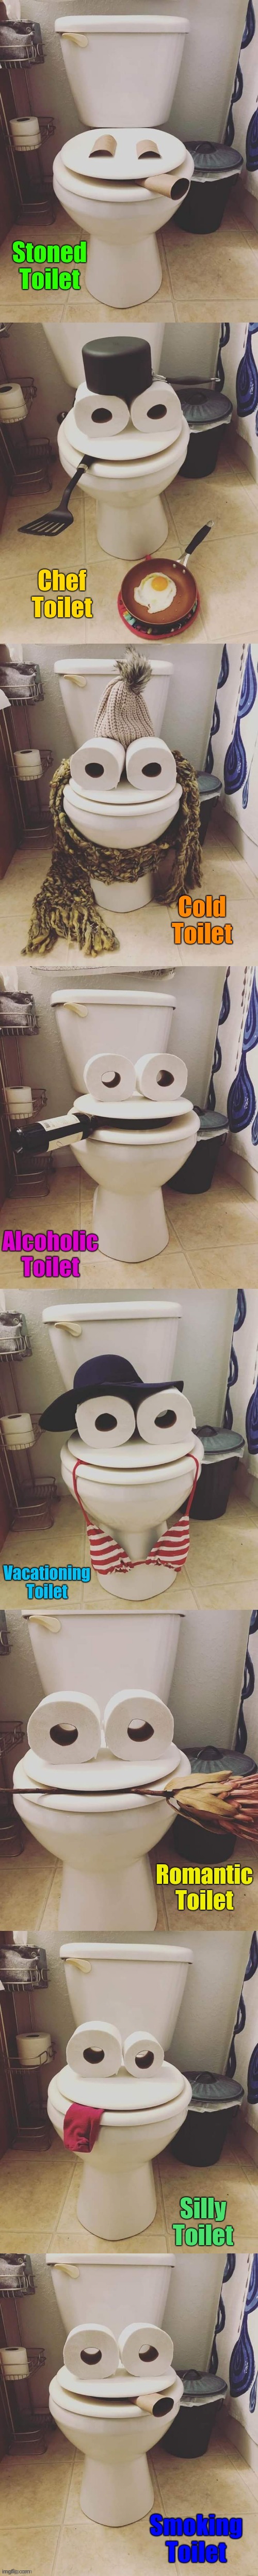 toilets | image tagged in memes | made w/ Imgflip meme maker